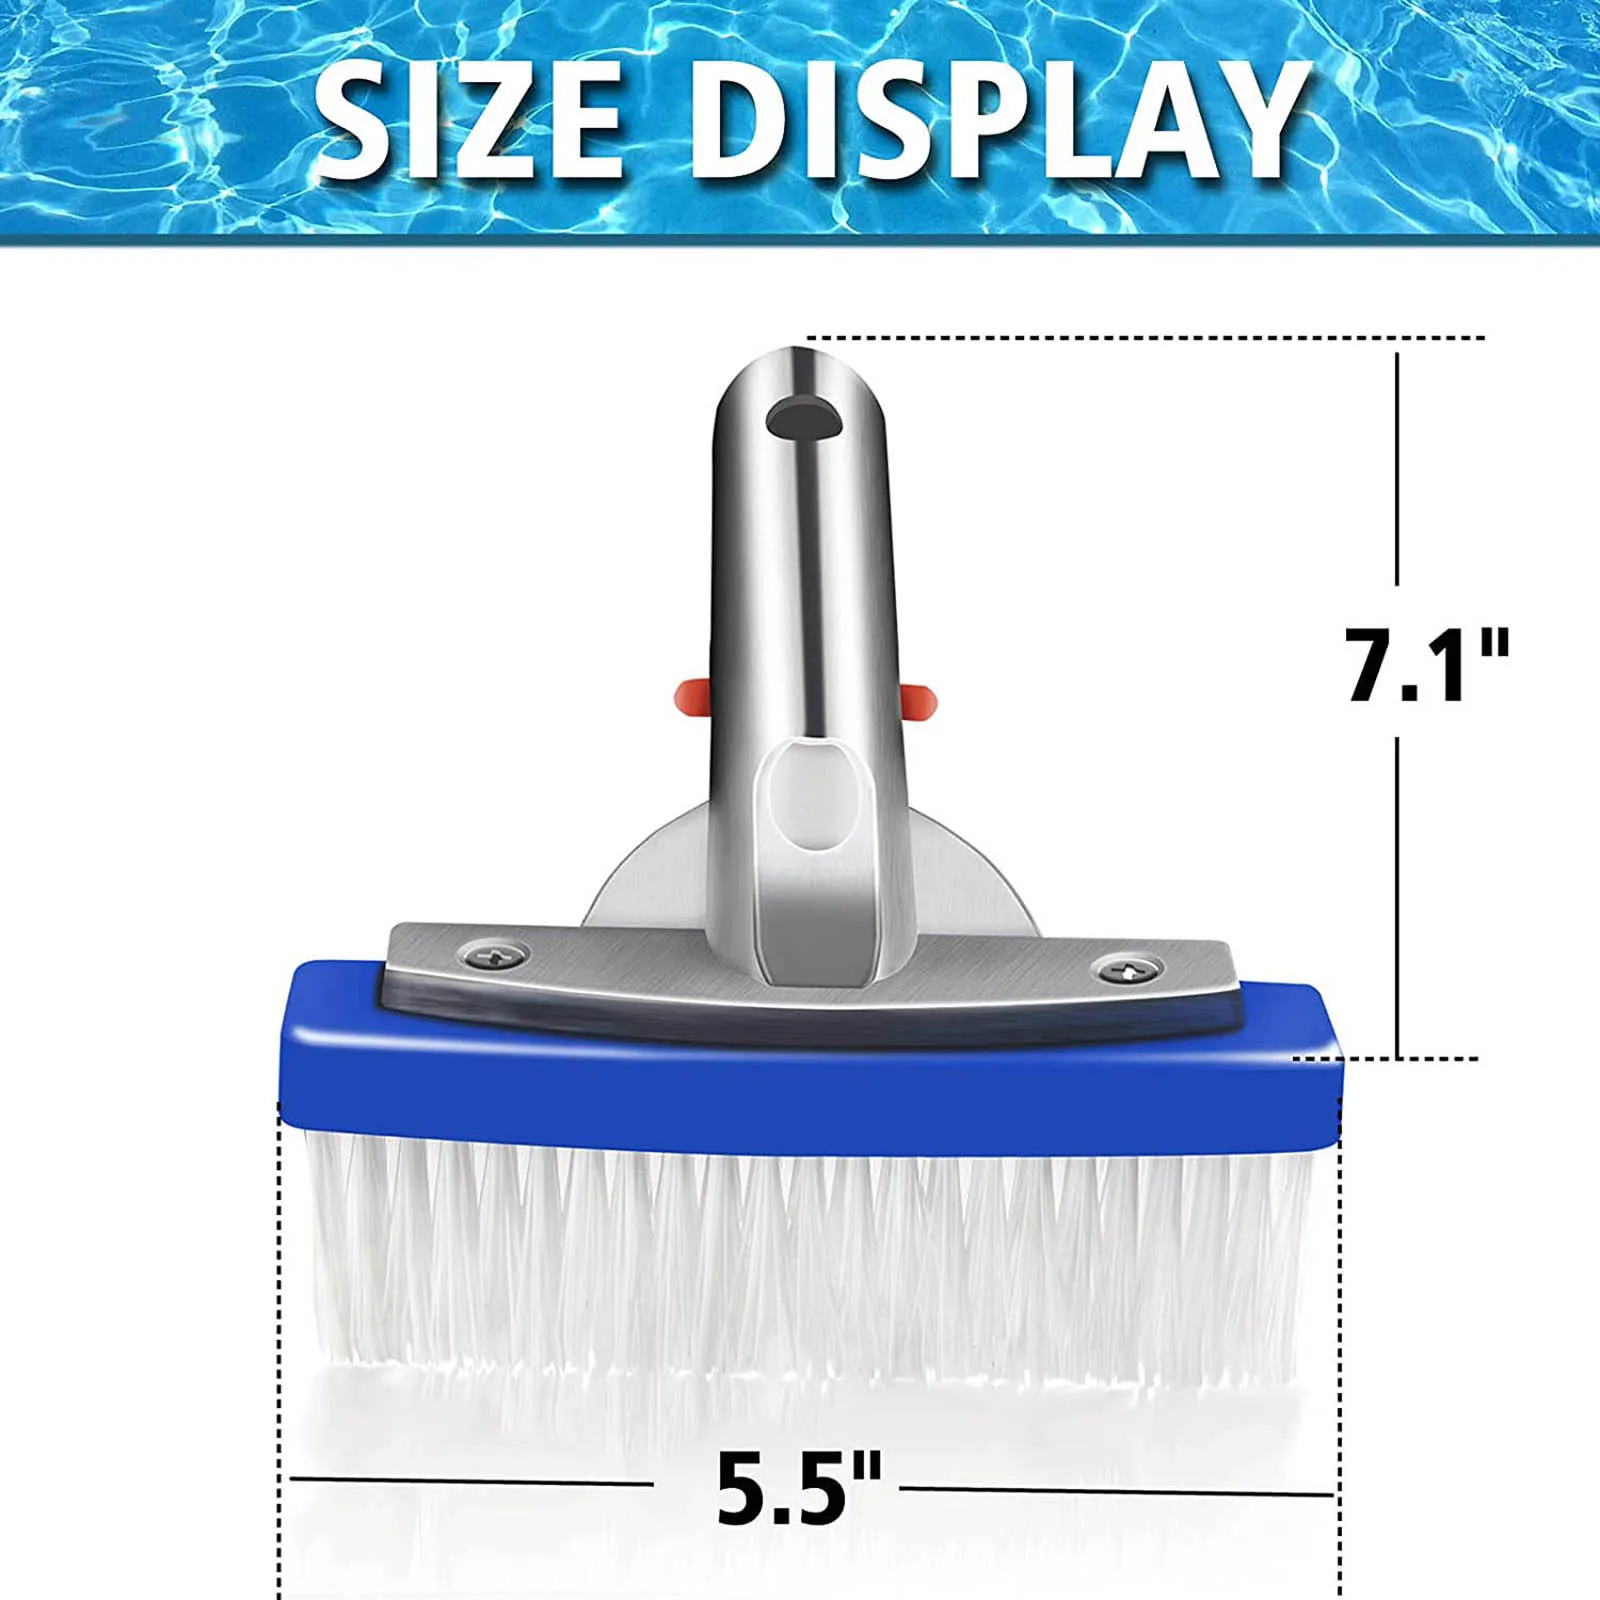 

Swimming Pool Brush Head 5.5 inch Polished Nylon Bristles Heavy Duty for Cleans Walls Tiles Floors Effortlessly